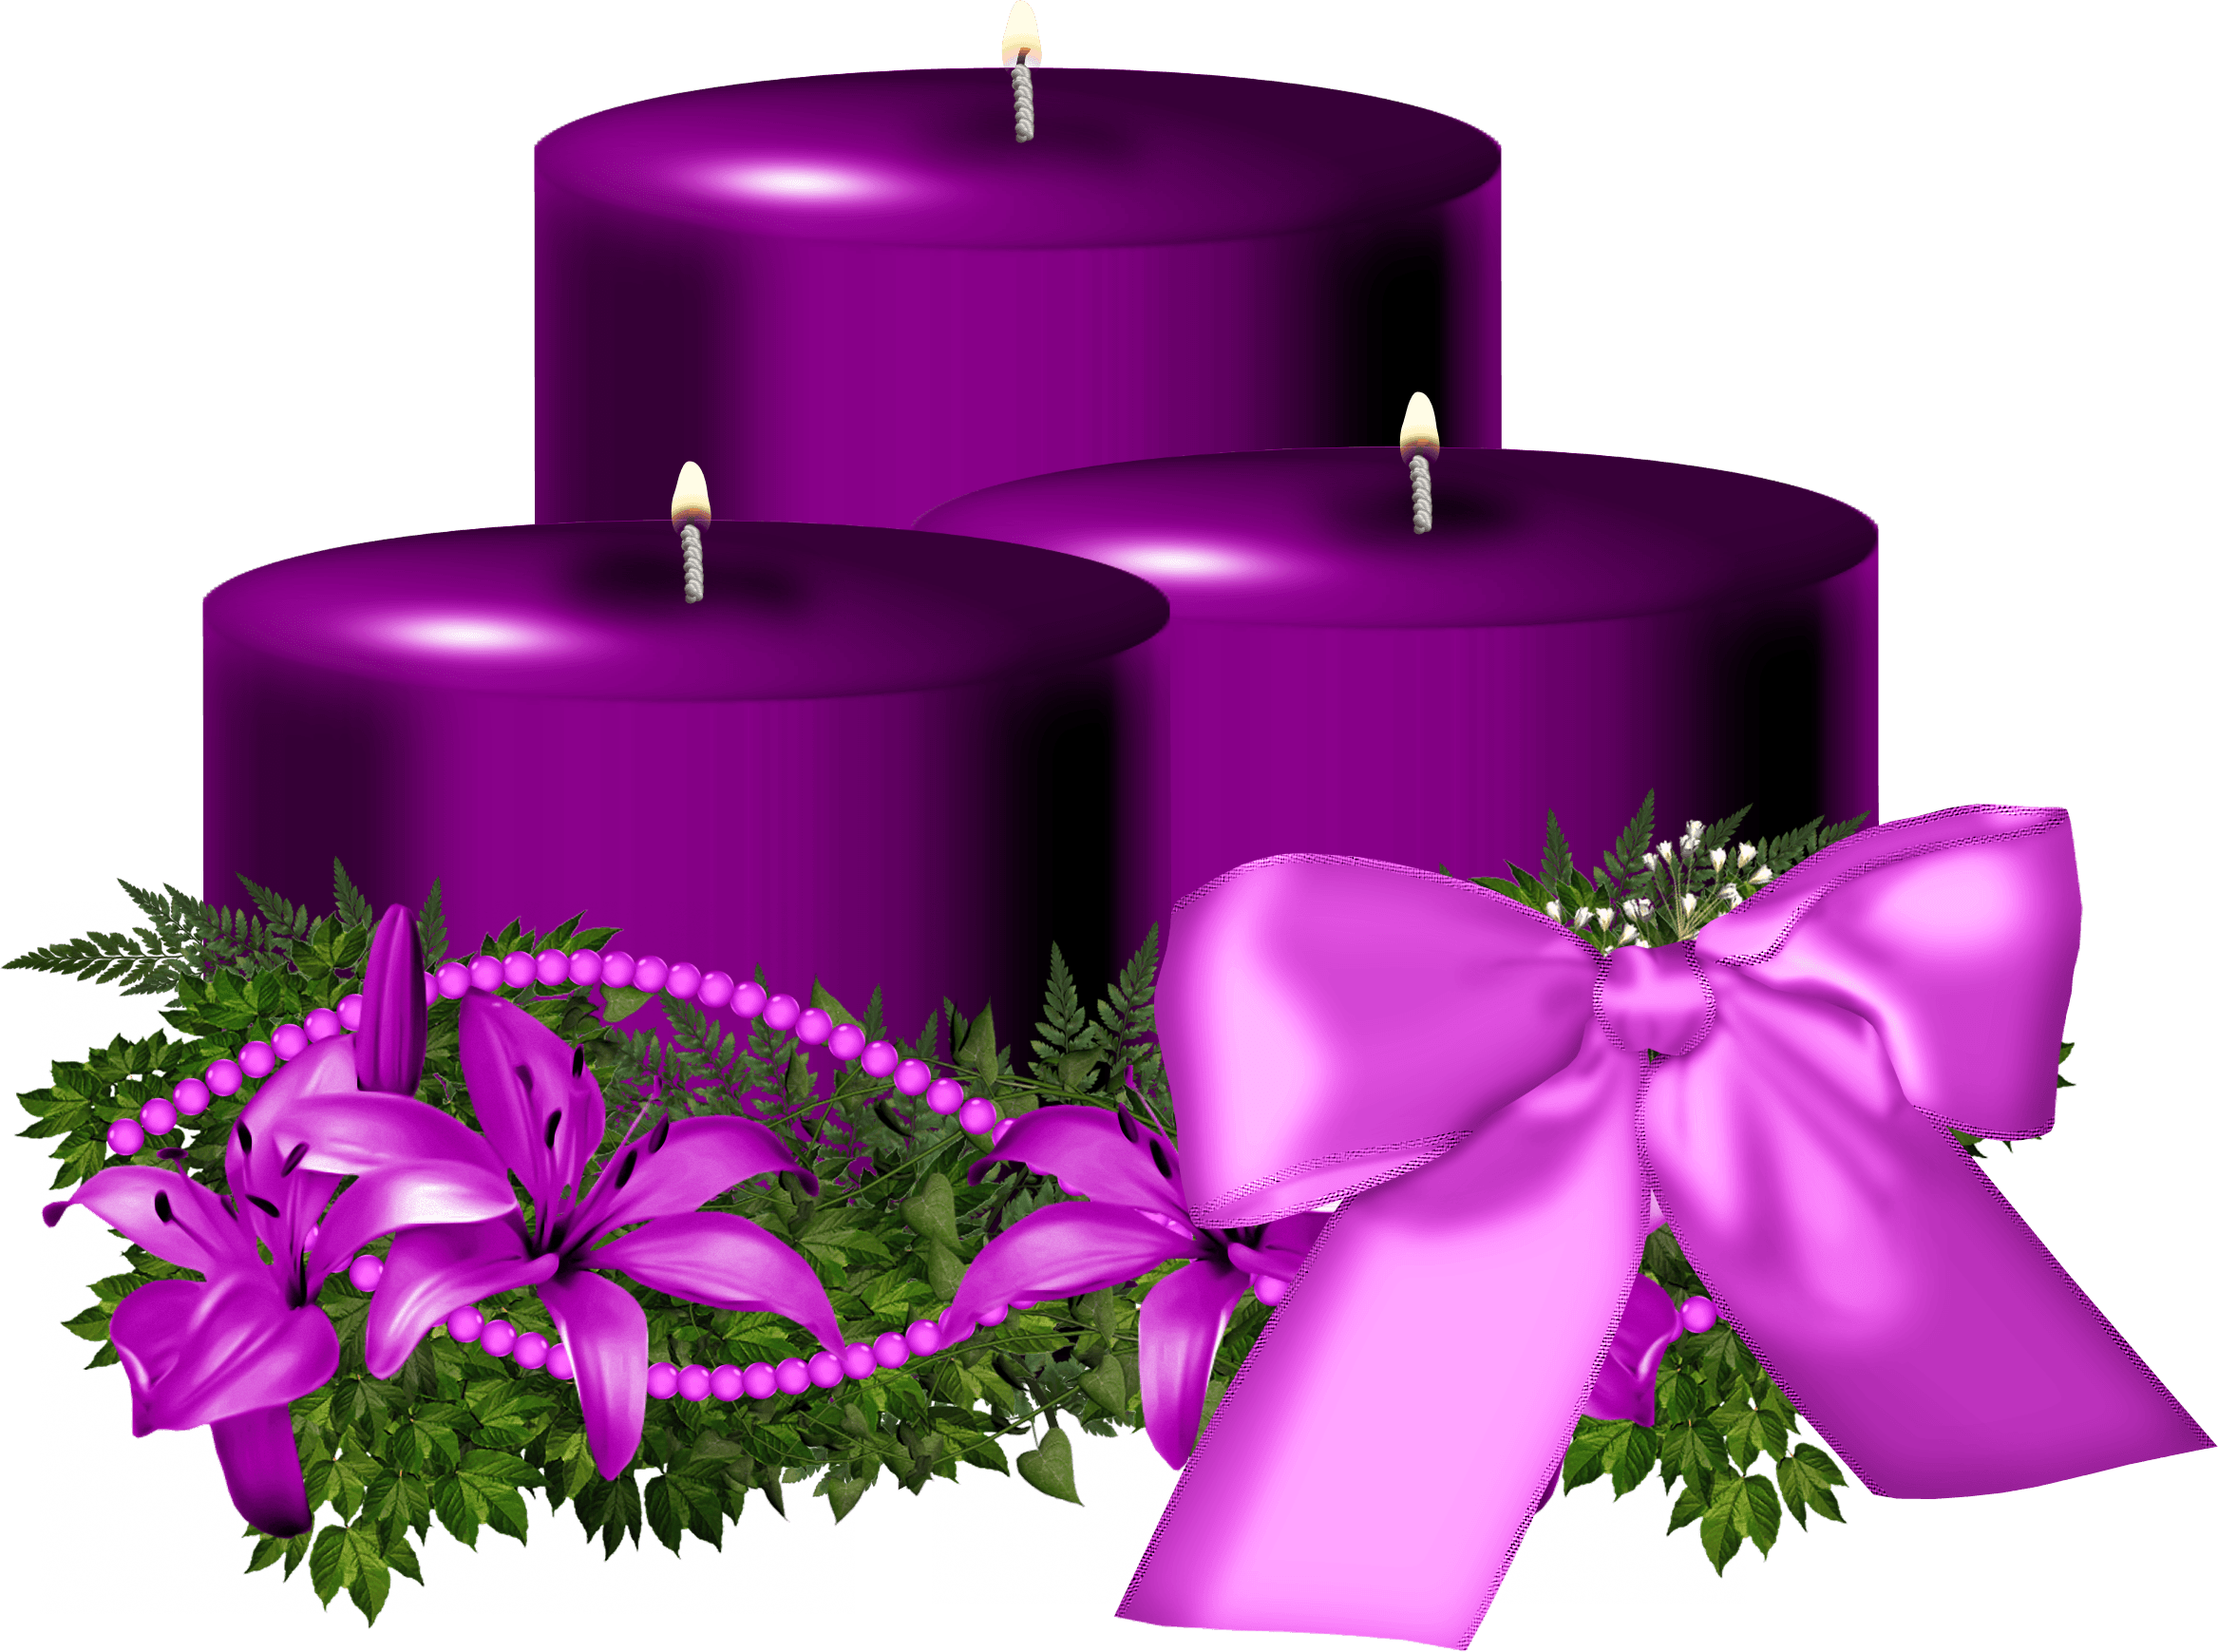 Candle Png Image PNG Image